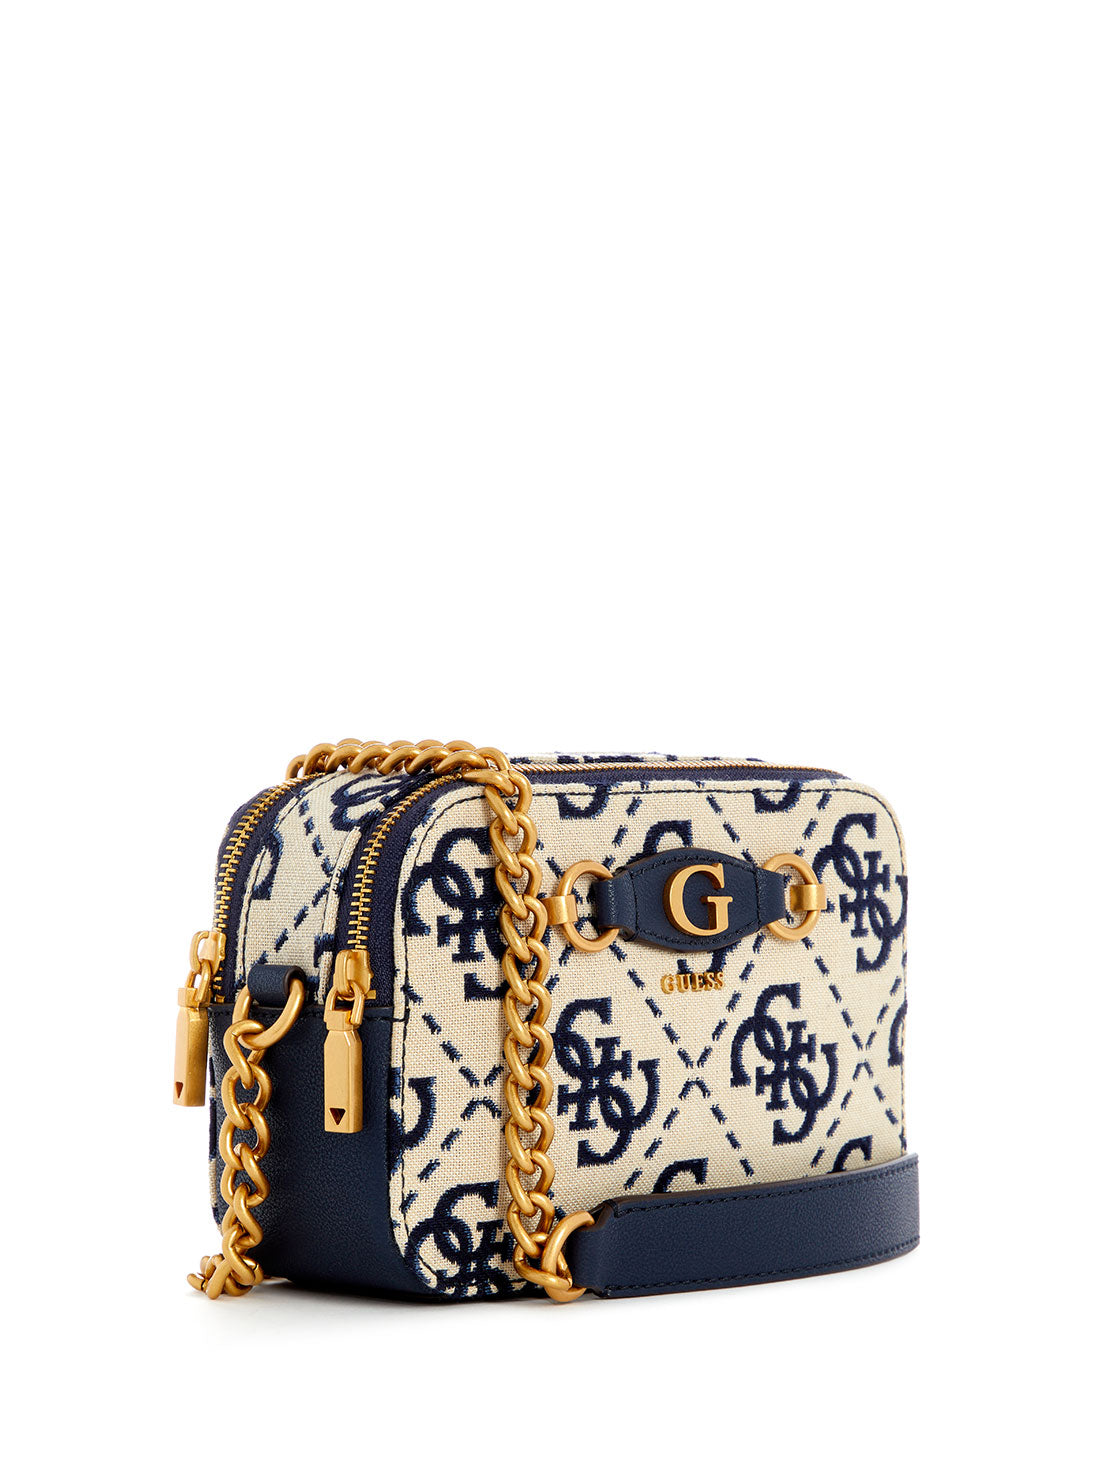 GUESS Blue Navy Logo Izzy Camera Bag side view